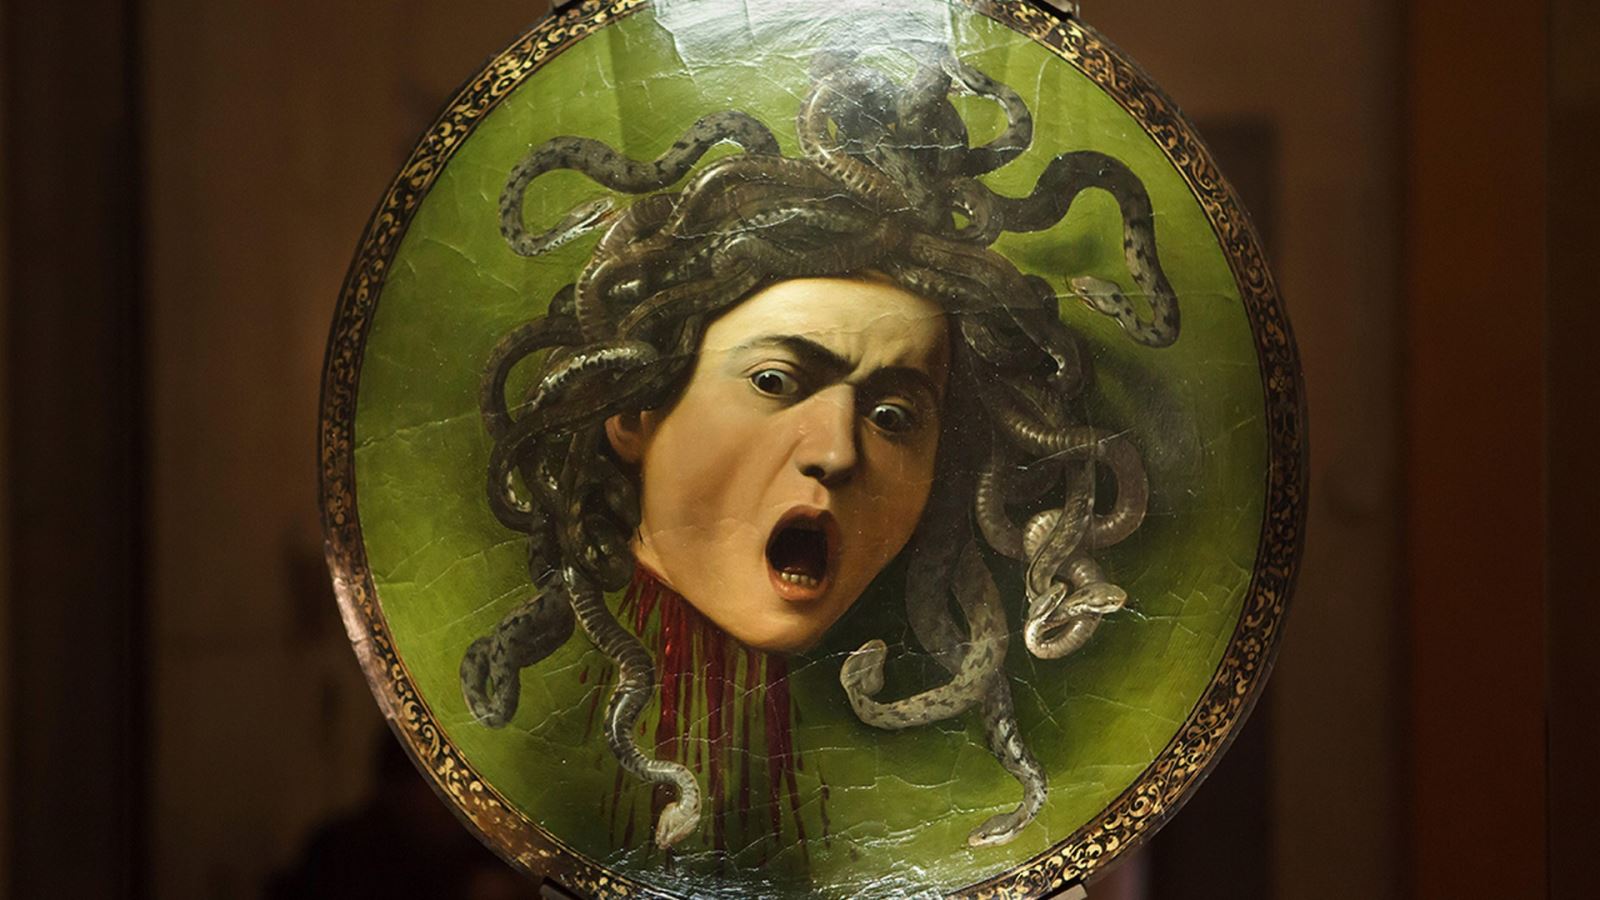 Medusa’s bloodcurdling scream as depicted by Caravaggio